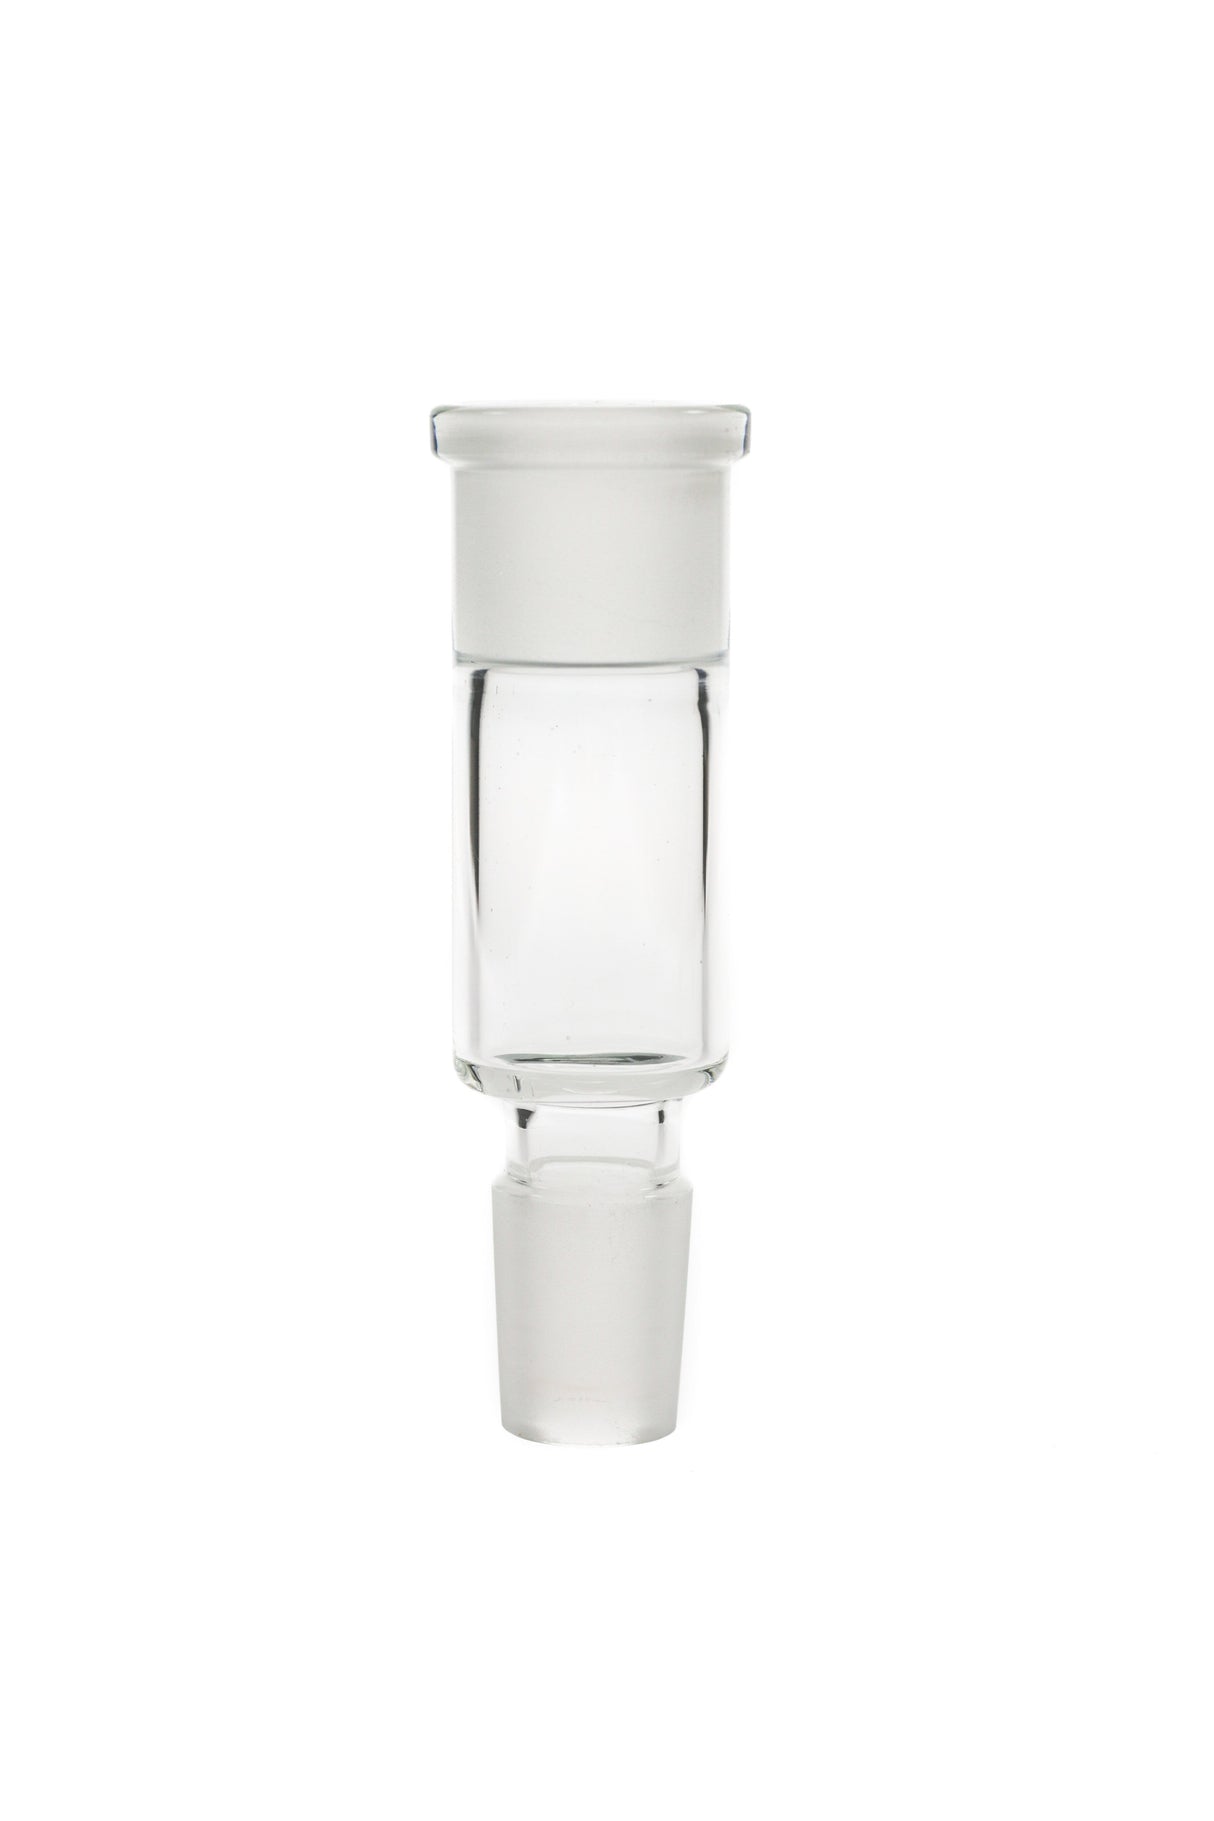 TAG clear quartz adapter extender, male to female joint, portable design, front view on white background